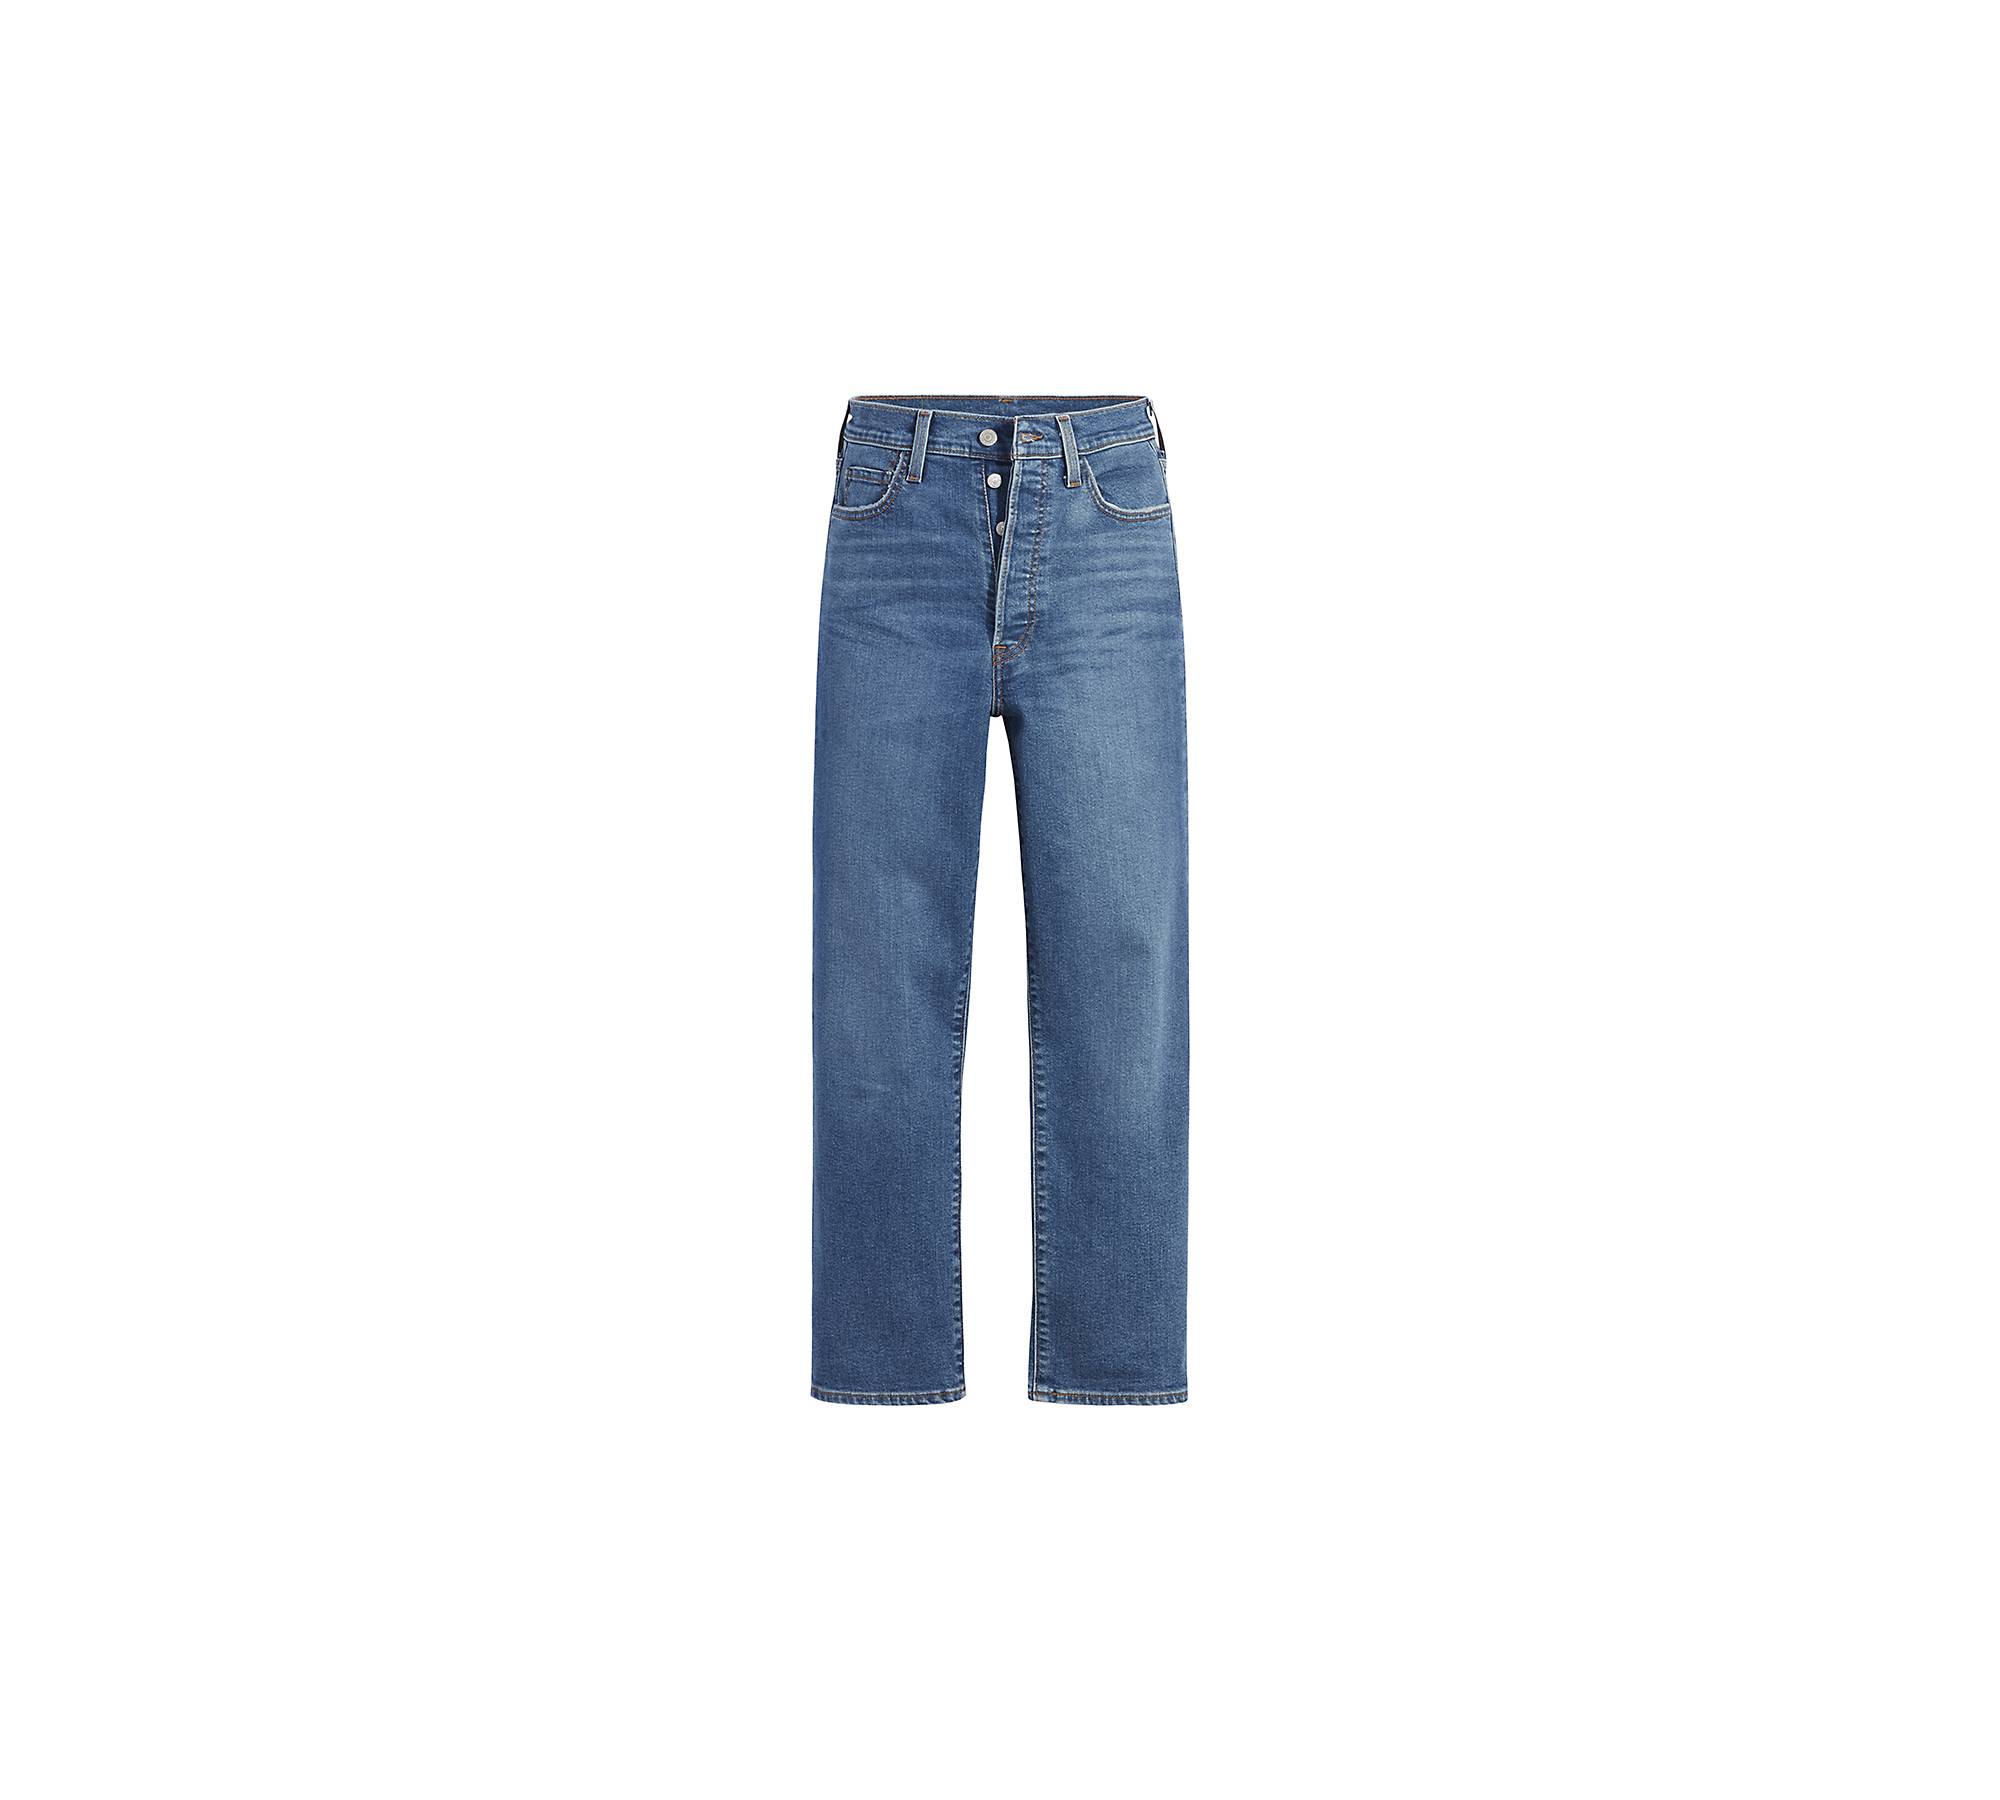 Ribcage Bootcut Jeans - Blue